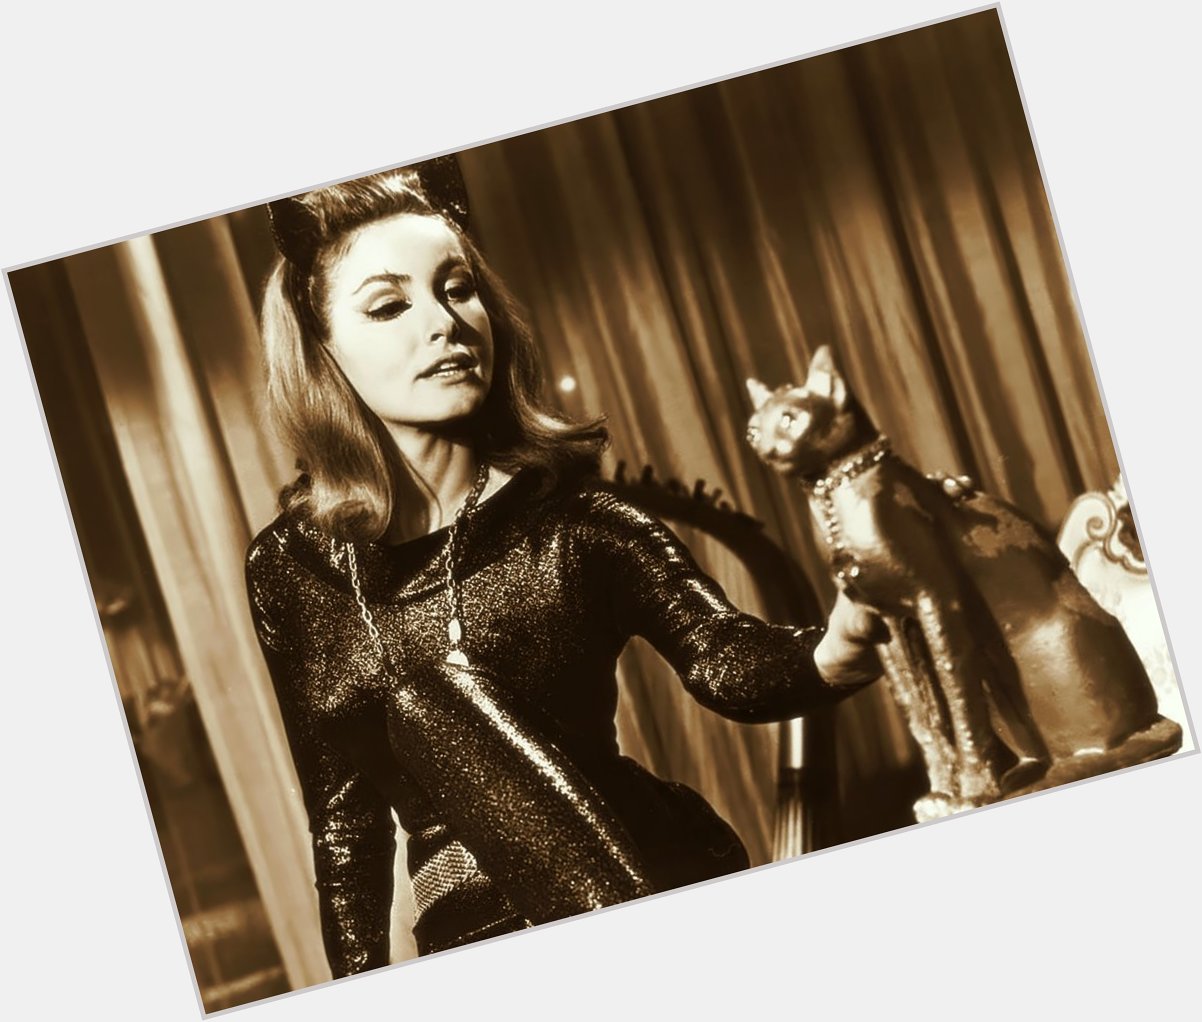 Happy birthday to Catwoman actress, Julie Newmar, born August 16, 1933.  